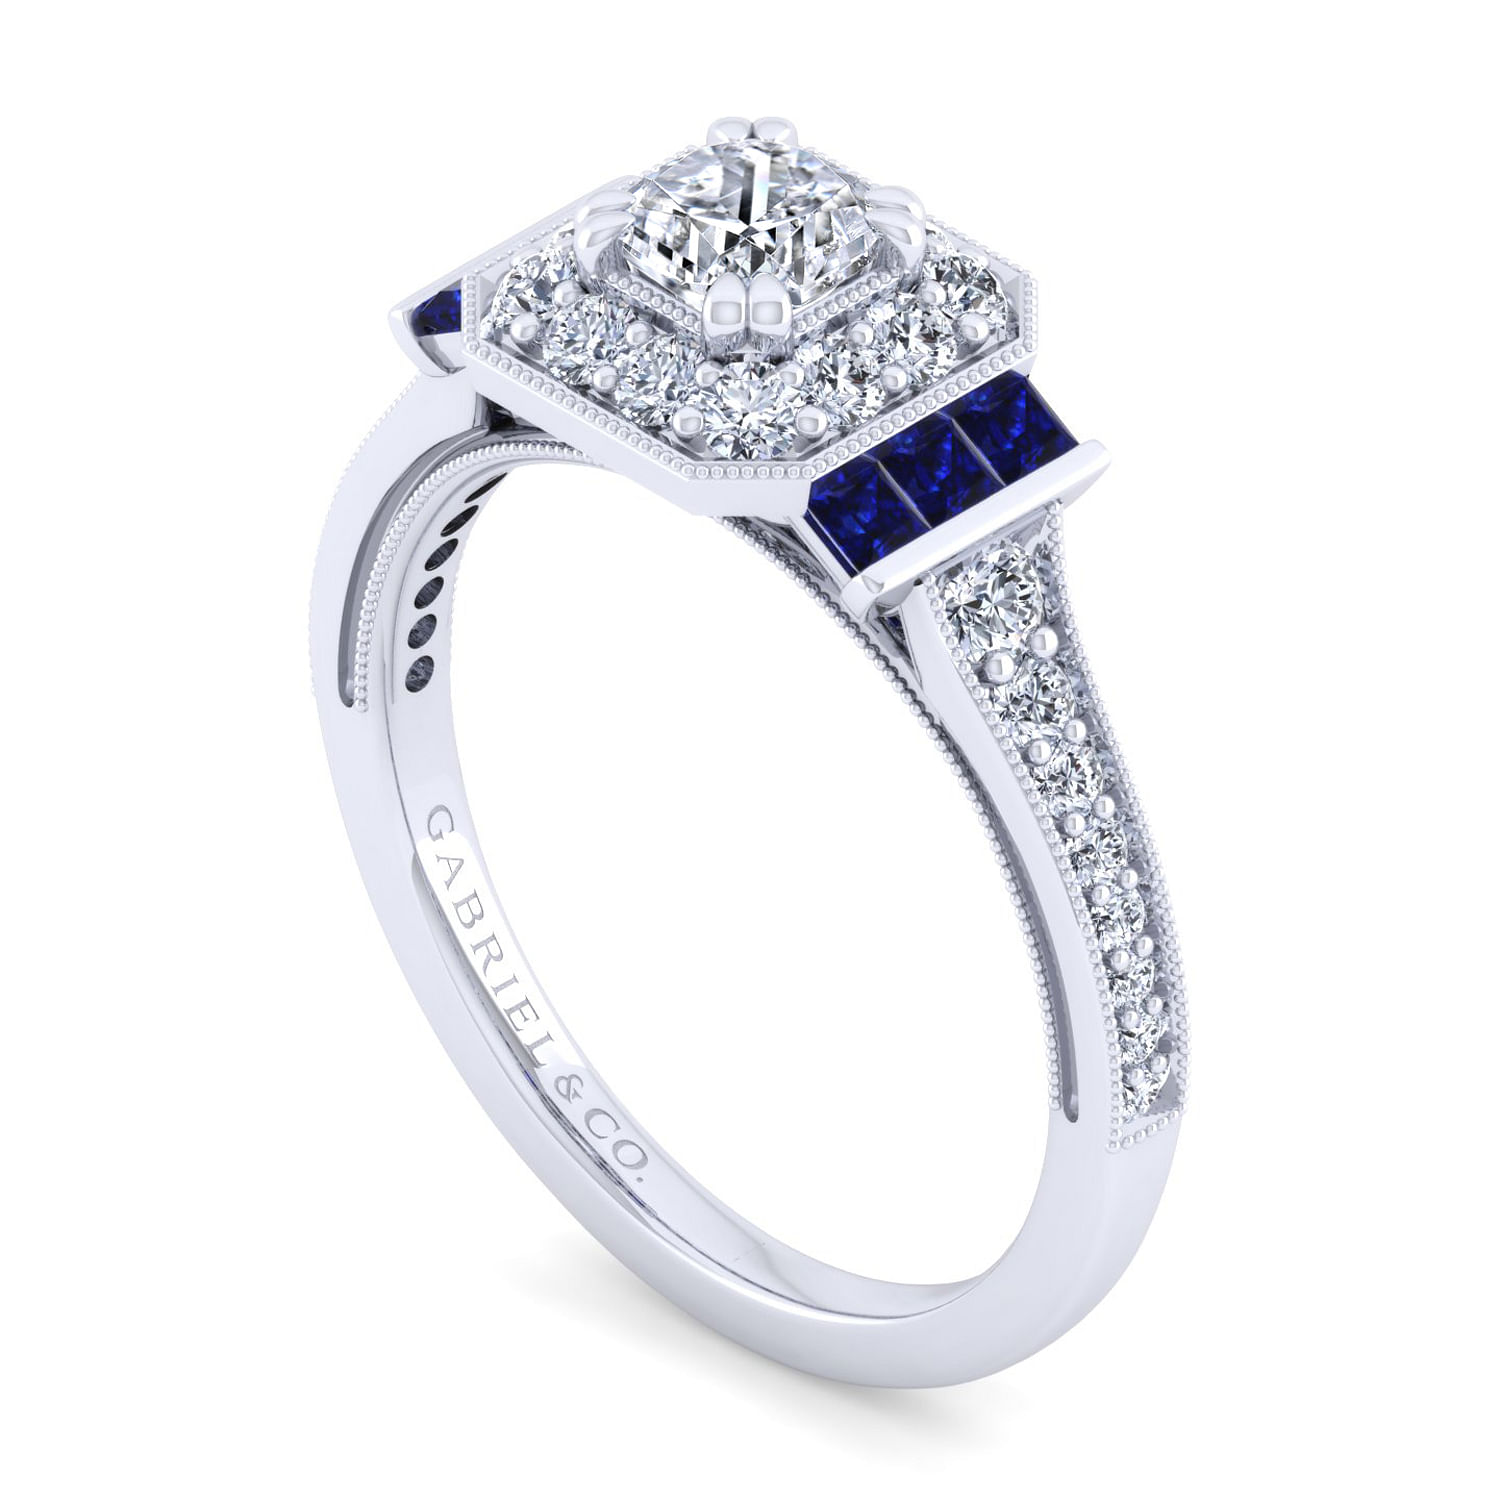 Vintage Inspired 14K White Gold Cushion Halo Sapphire and Diamond Engagement Ring